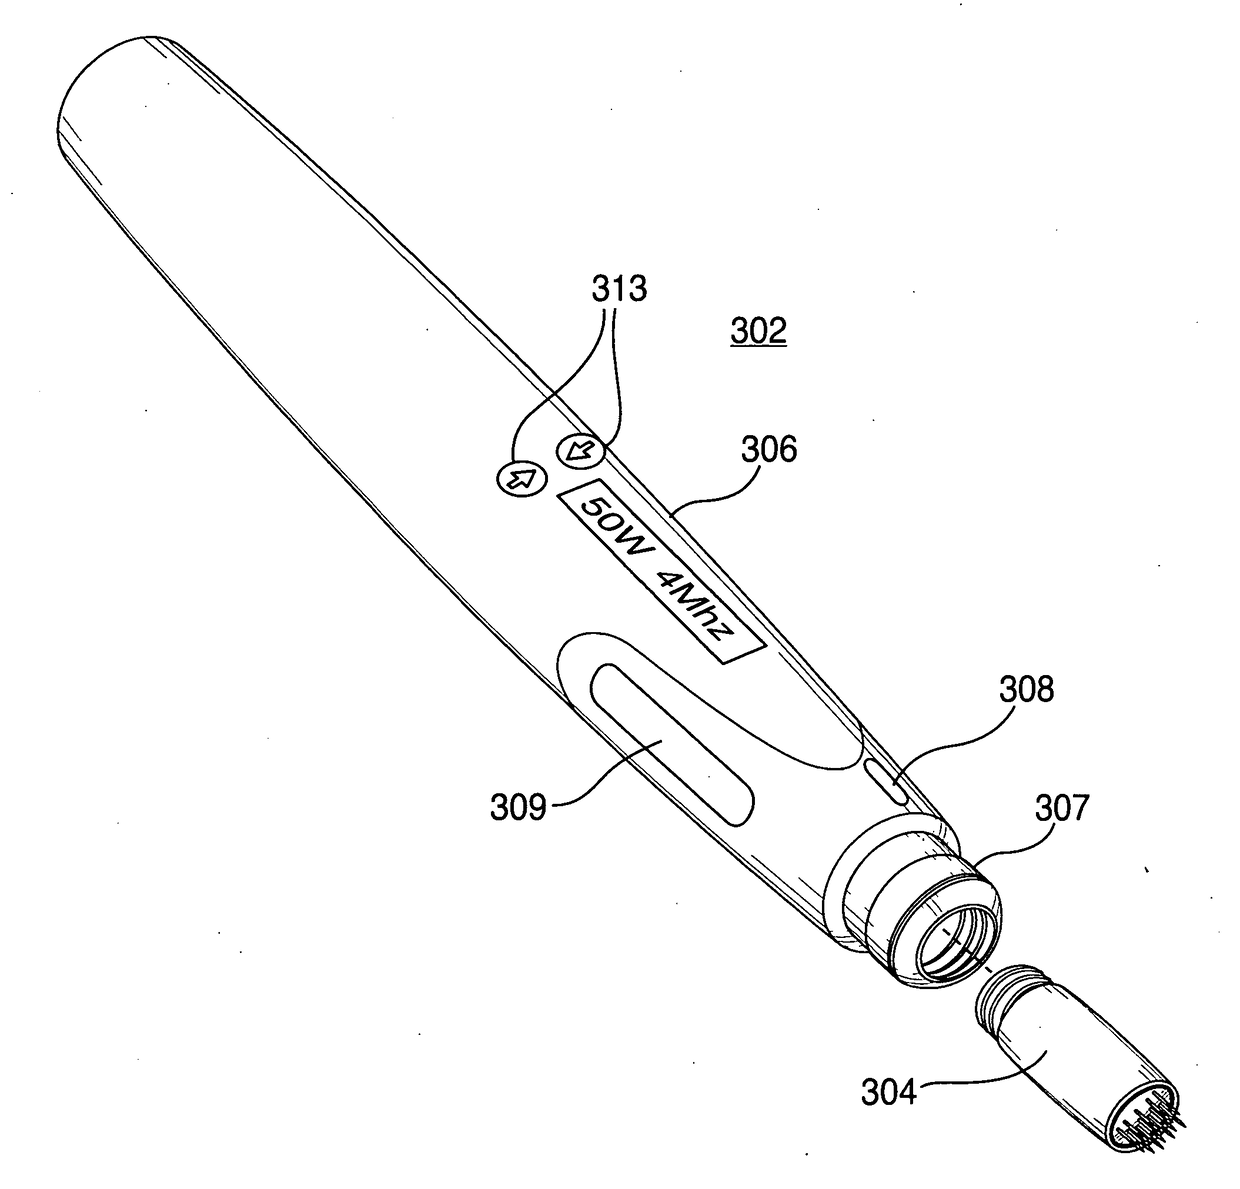 Radio frequency handpiece for medical treatments